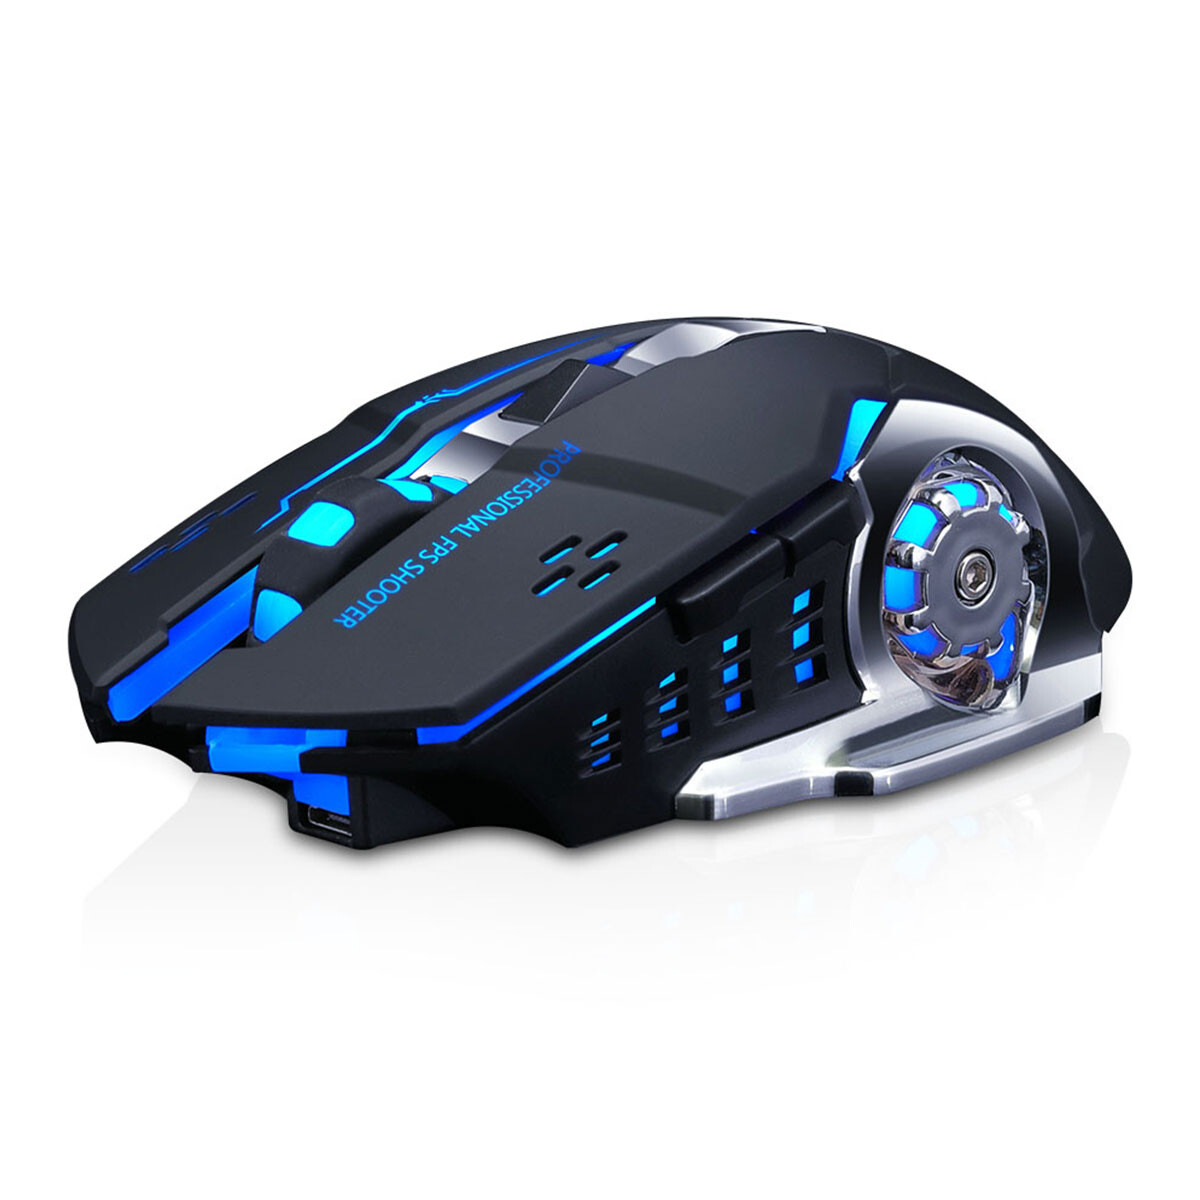 MOUSE GAMER INALAMBRICO TWOLF Q14 NEGRO 